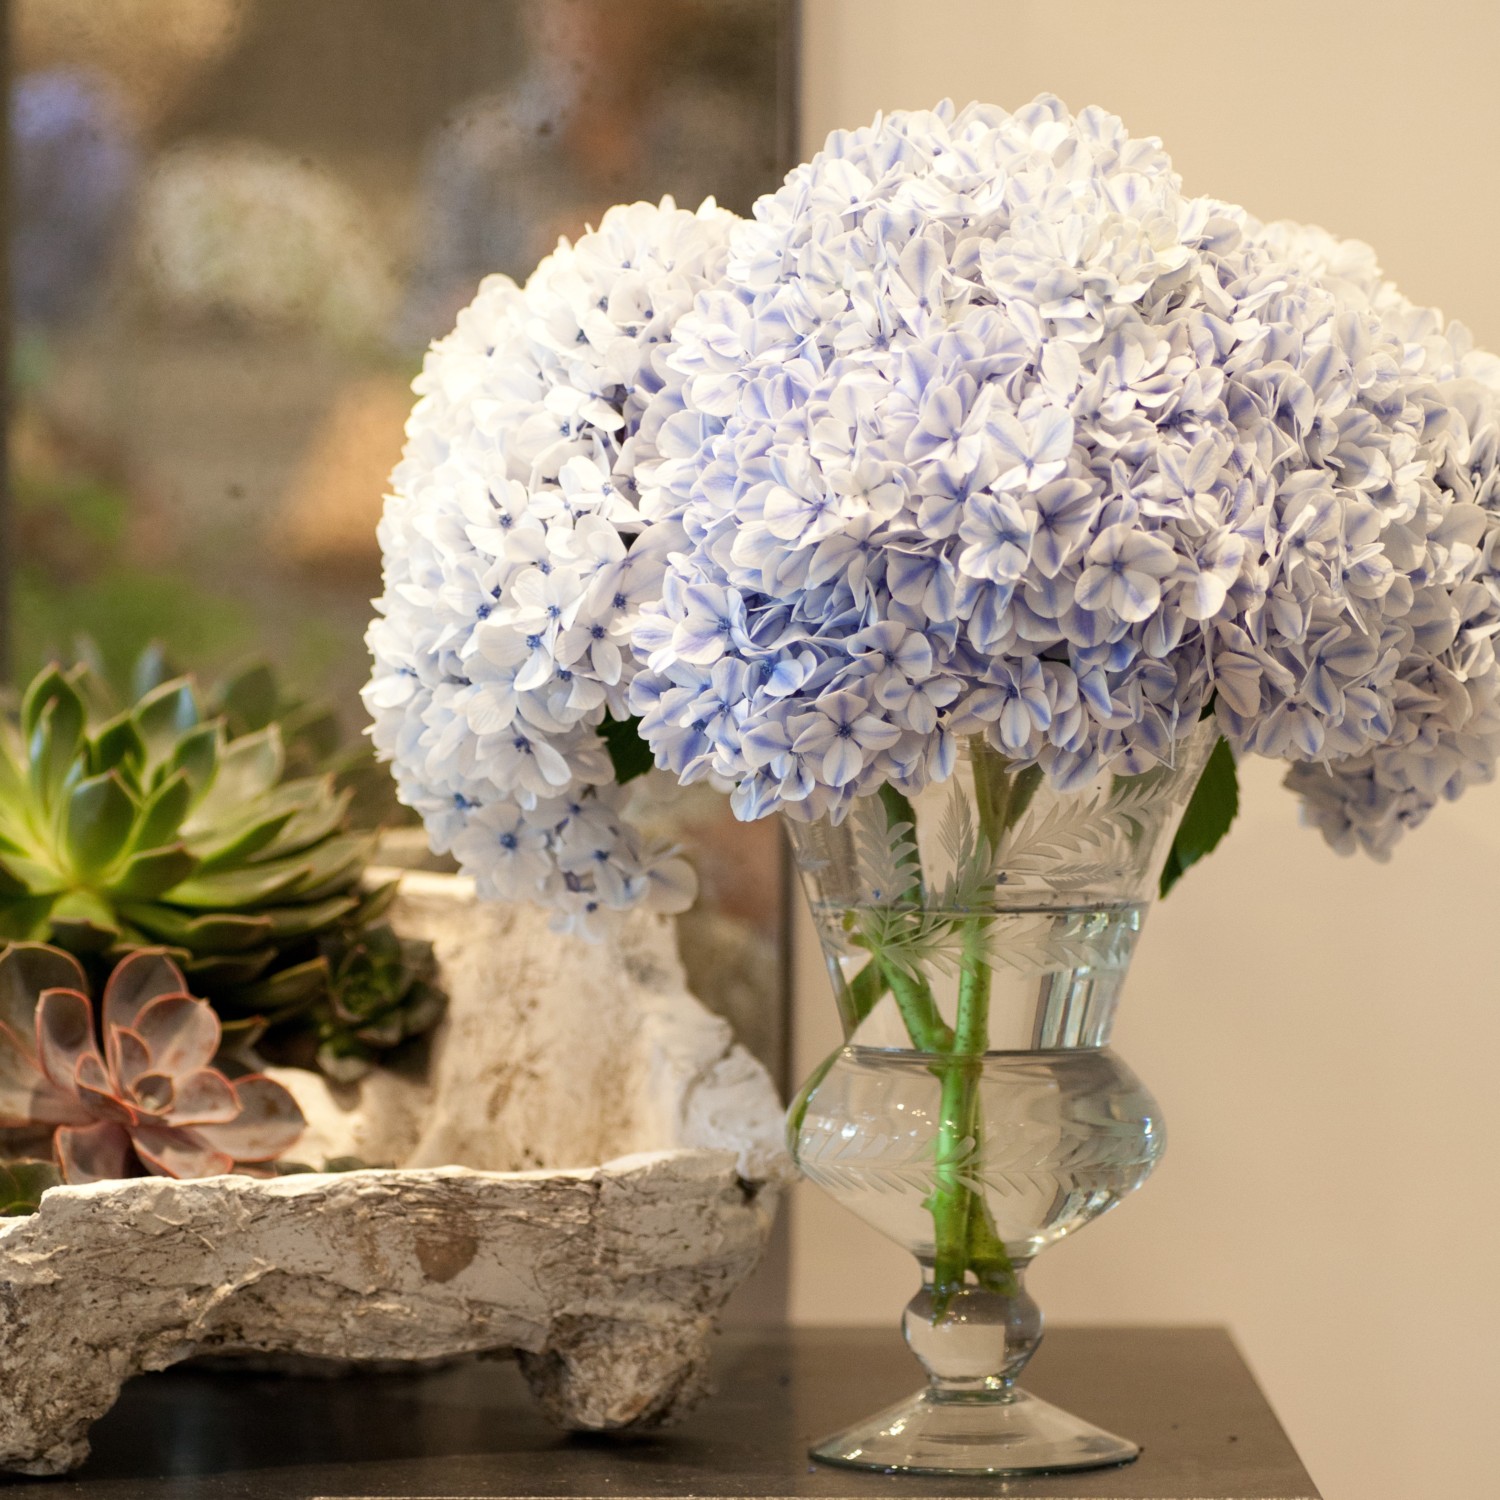 Crystal vase of blue and white, bi-color "Peppermint" hydrangeas.